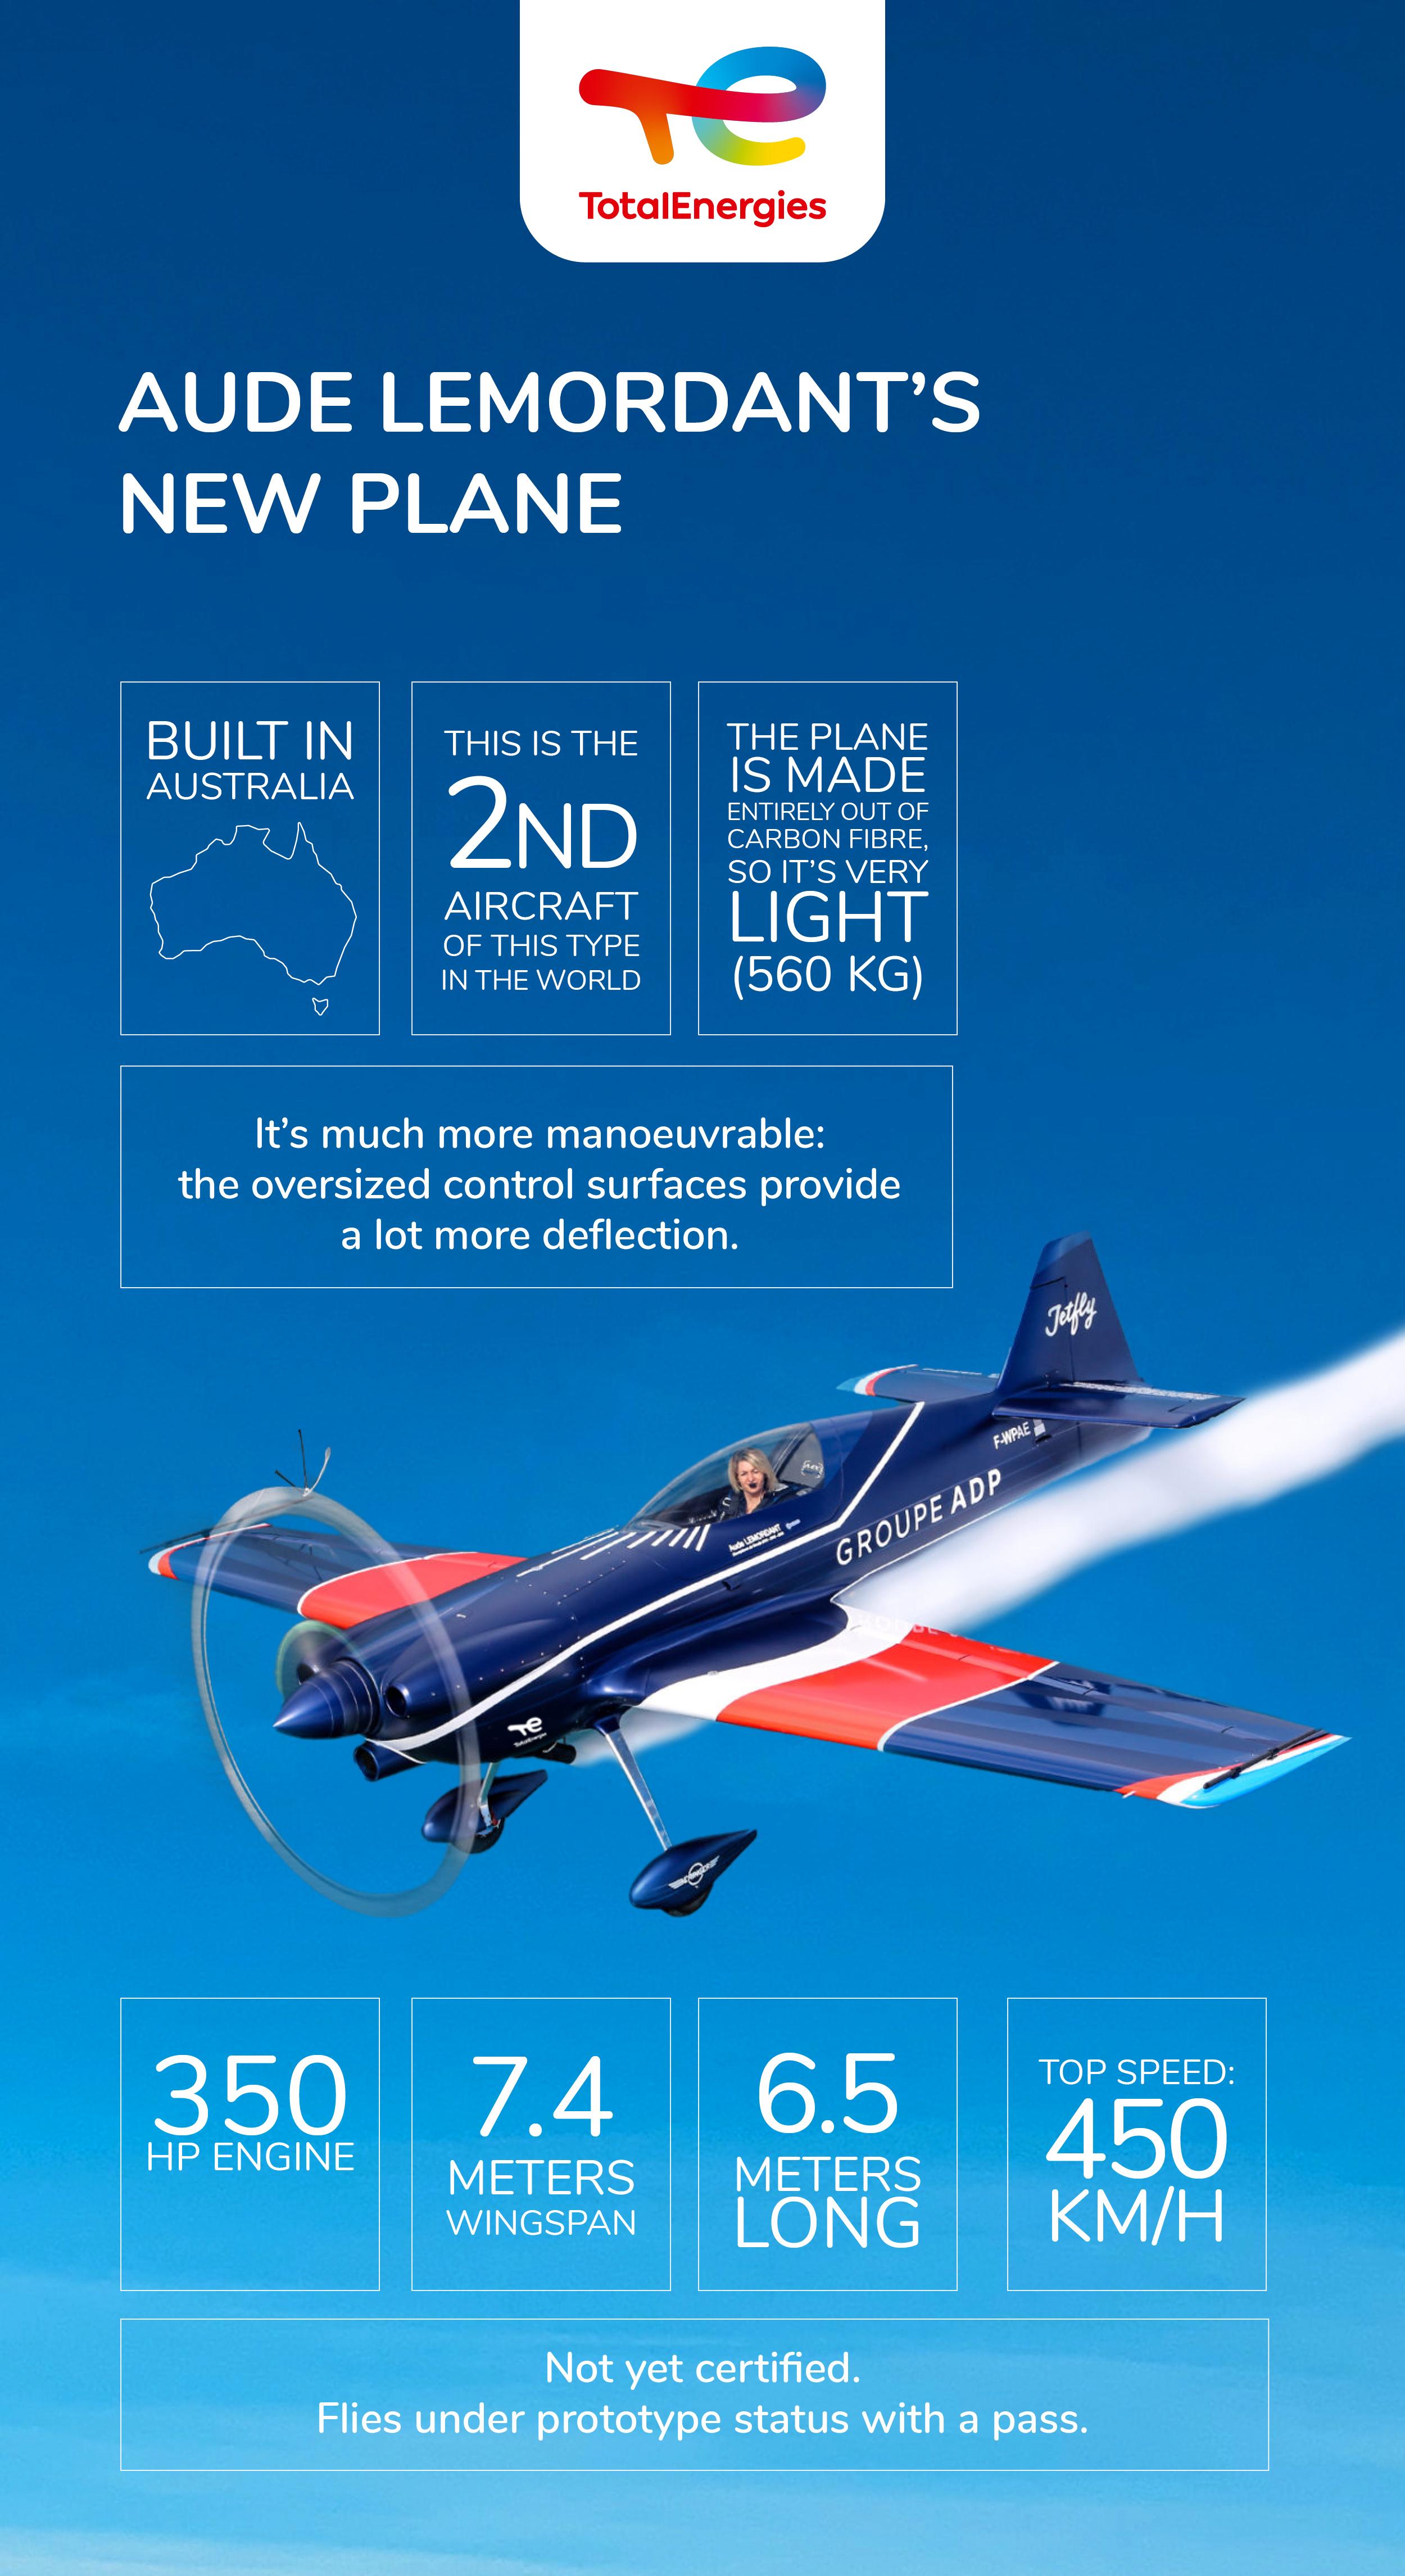 Aude Lemordant's new place infography
Built in Australia.
This is the 2nd aircraft of this type in the world.
The plane is made entirely out of carbon fibre. So it's very light (560 kg)
It's much more manoeuvrable:the oversized control surfaces provide a lot more deflection. 

350 HP engine
7.4 meters wingspan 
6.5 meters long
Top speed: 450 km/h
Not yet certified. Files under prototype status with a pass. 